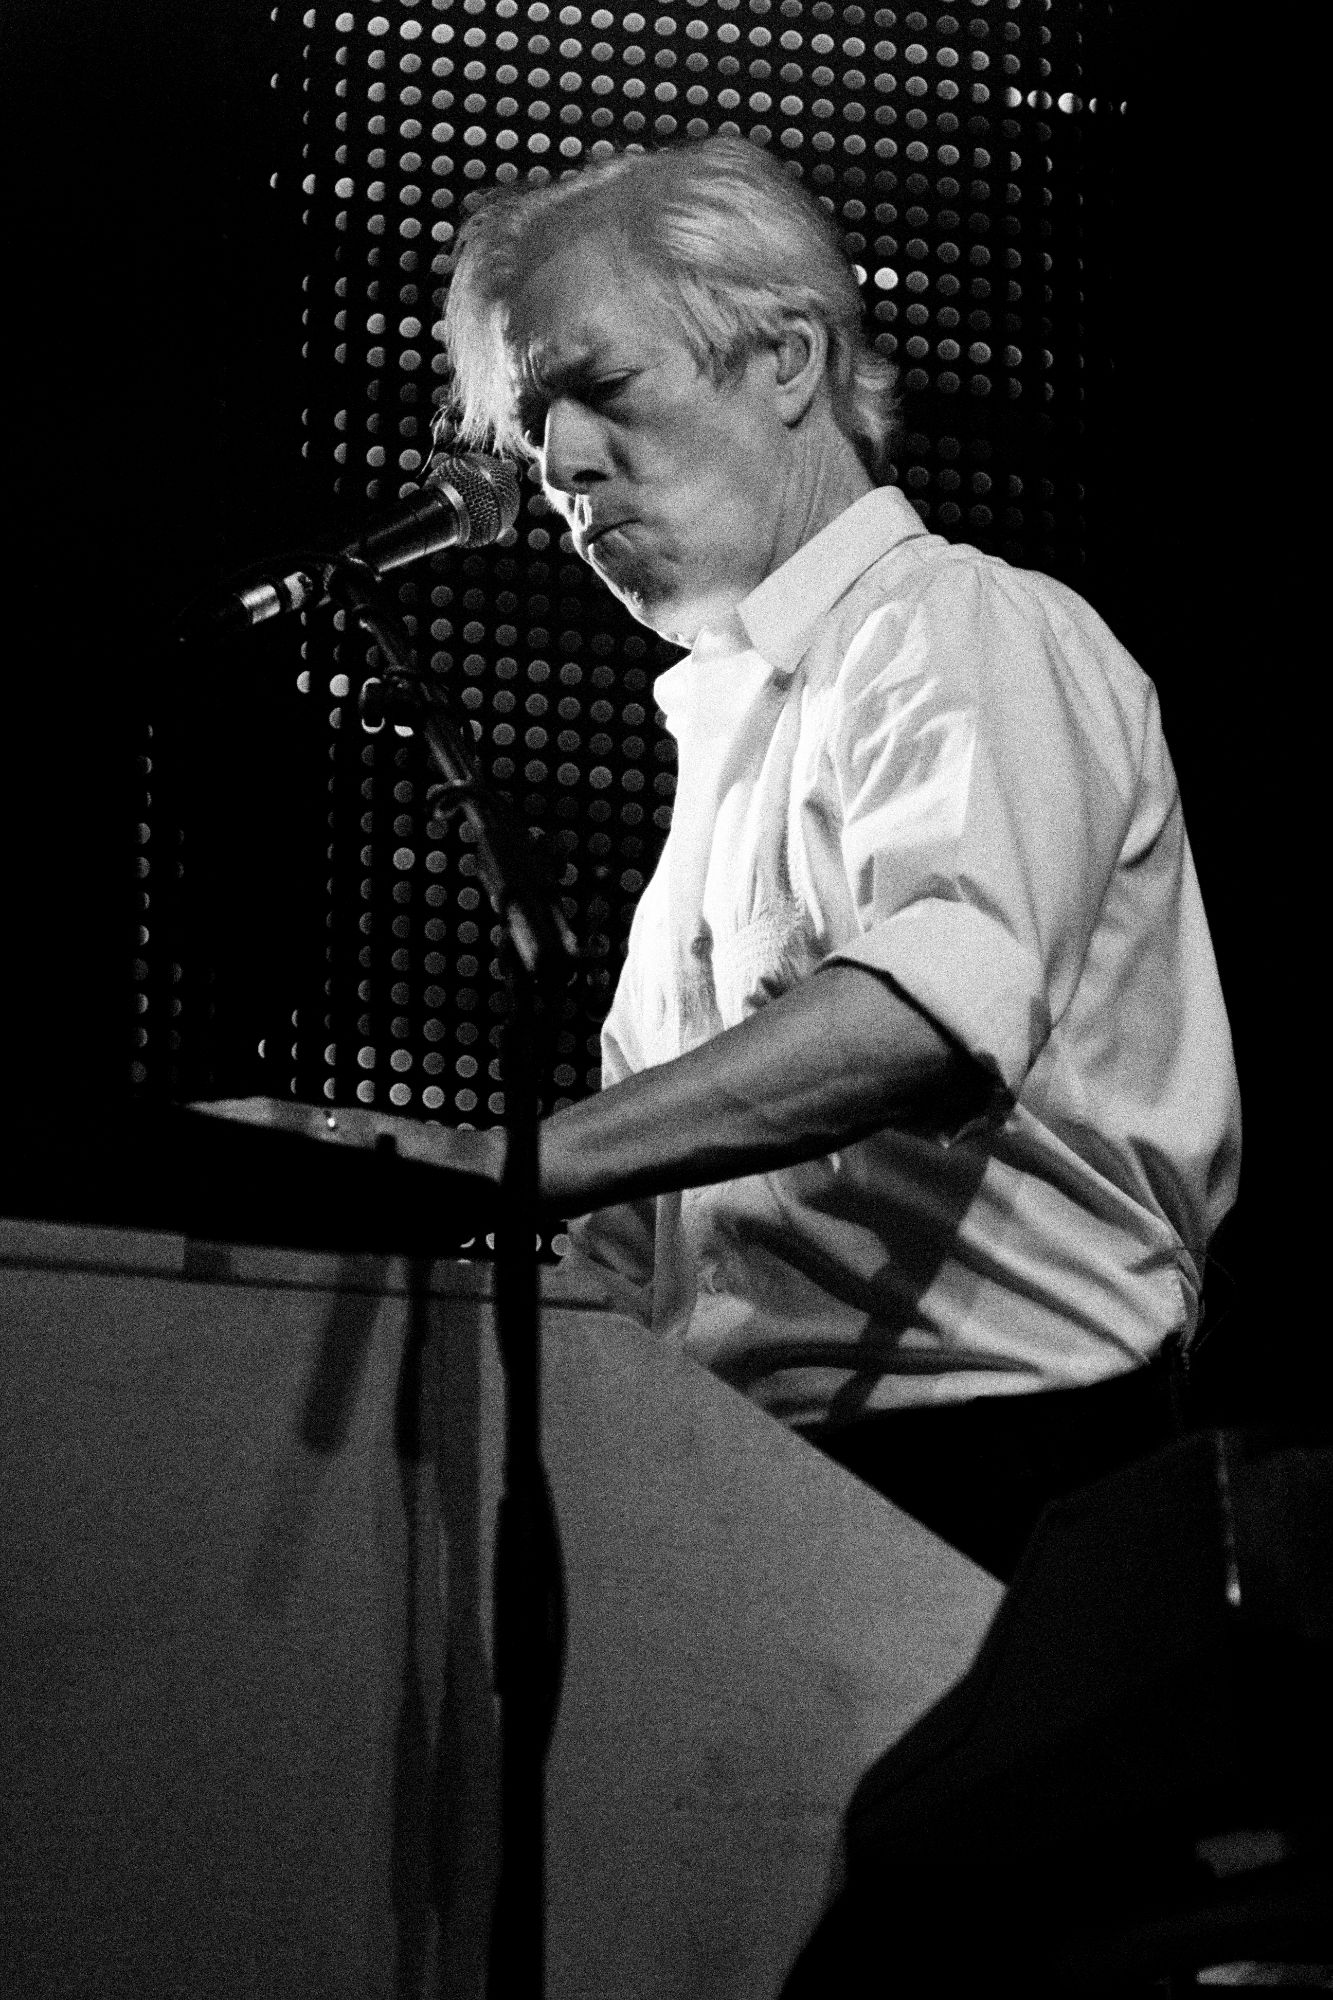 Black and white photo of Status Quo performing live in Olomouc Czech republic